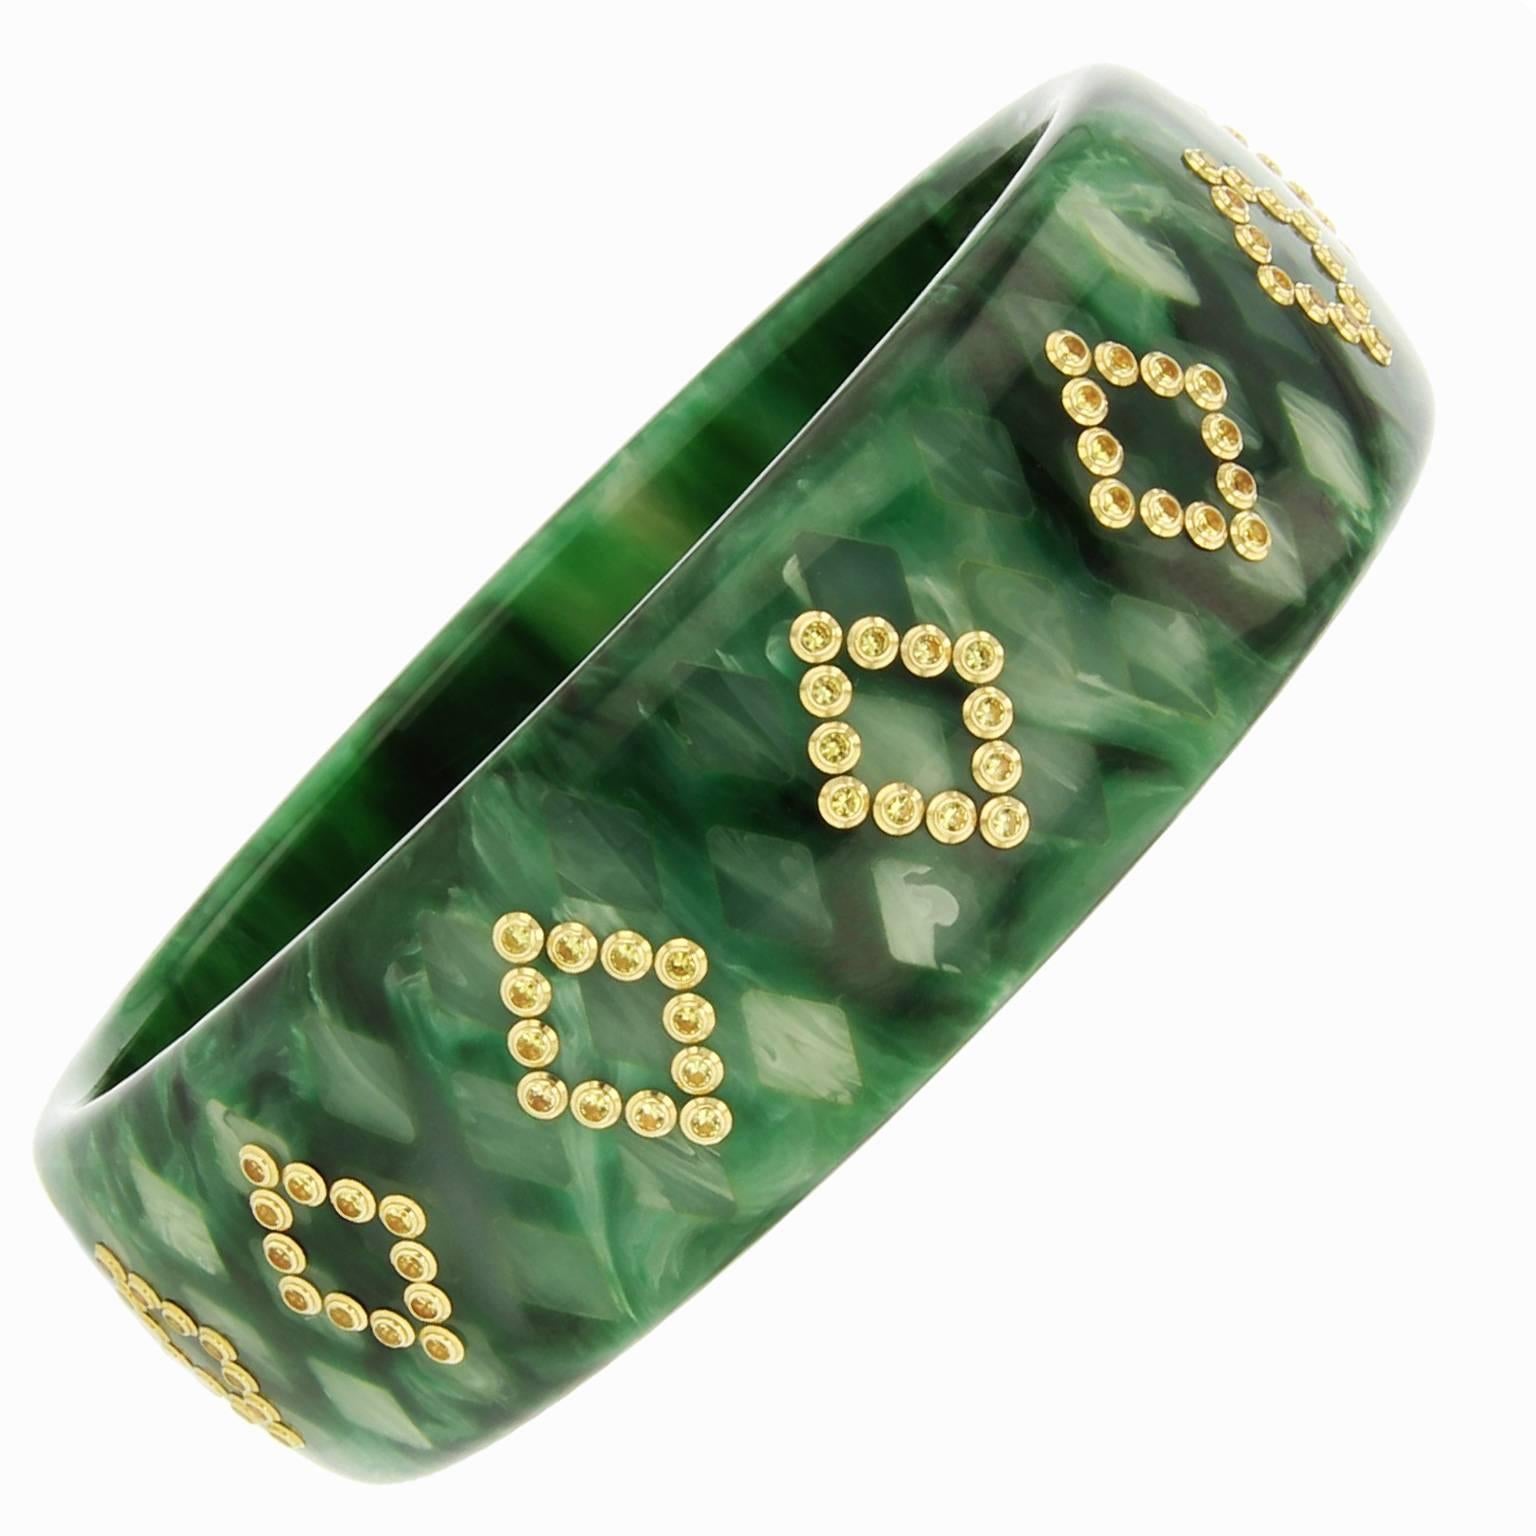 This Mark Davis marbled green vintage bakelite bangle is finely inlaid with lighter green bakelite creating a subtle diamond pattern. Yellow sapphires, bezel-set in 18k yellow gold create a diamond-shaped pattern overlaid around the bangle.  

Full